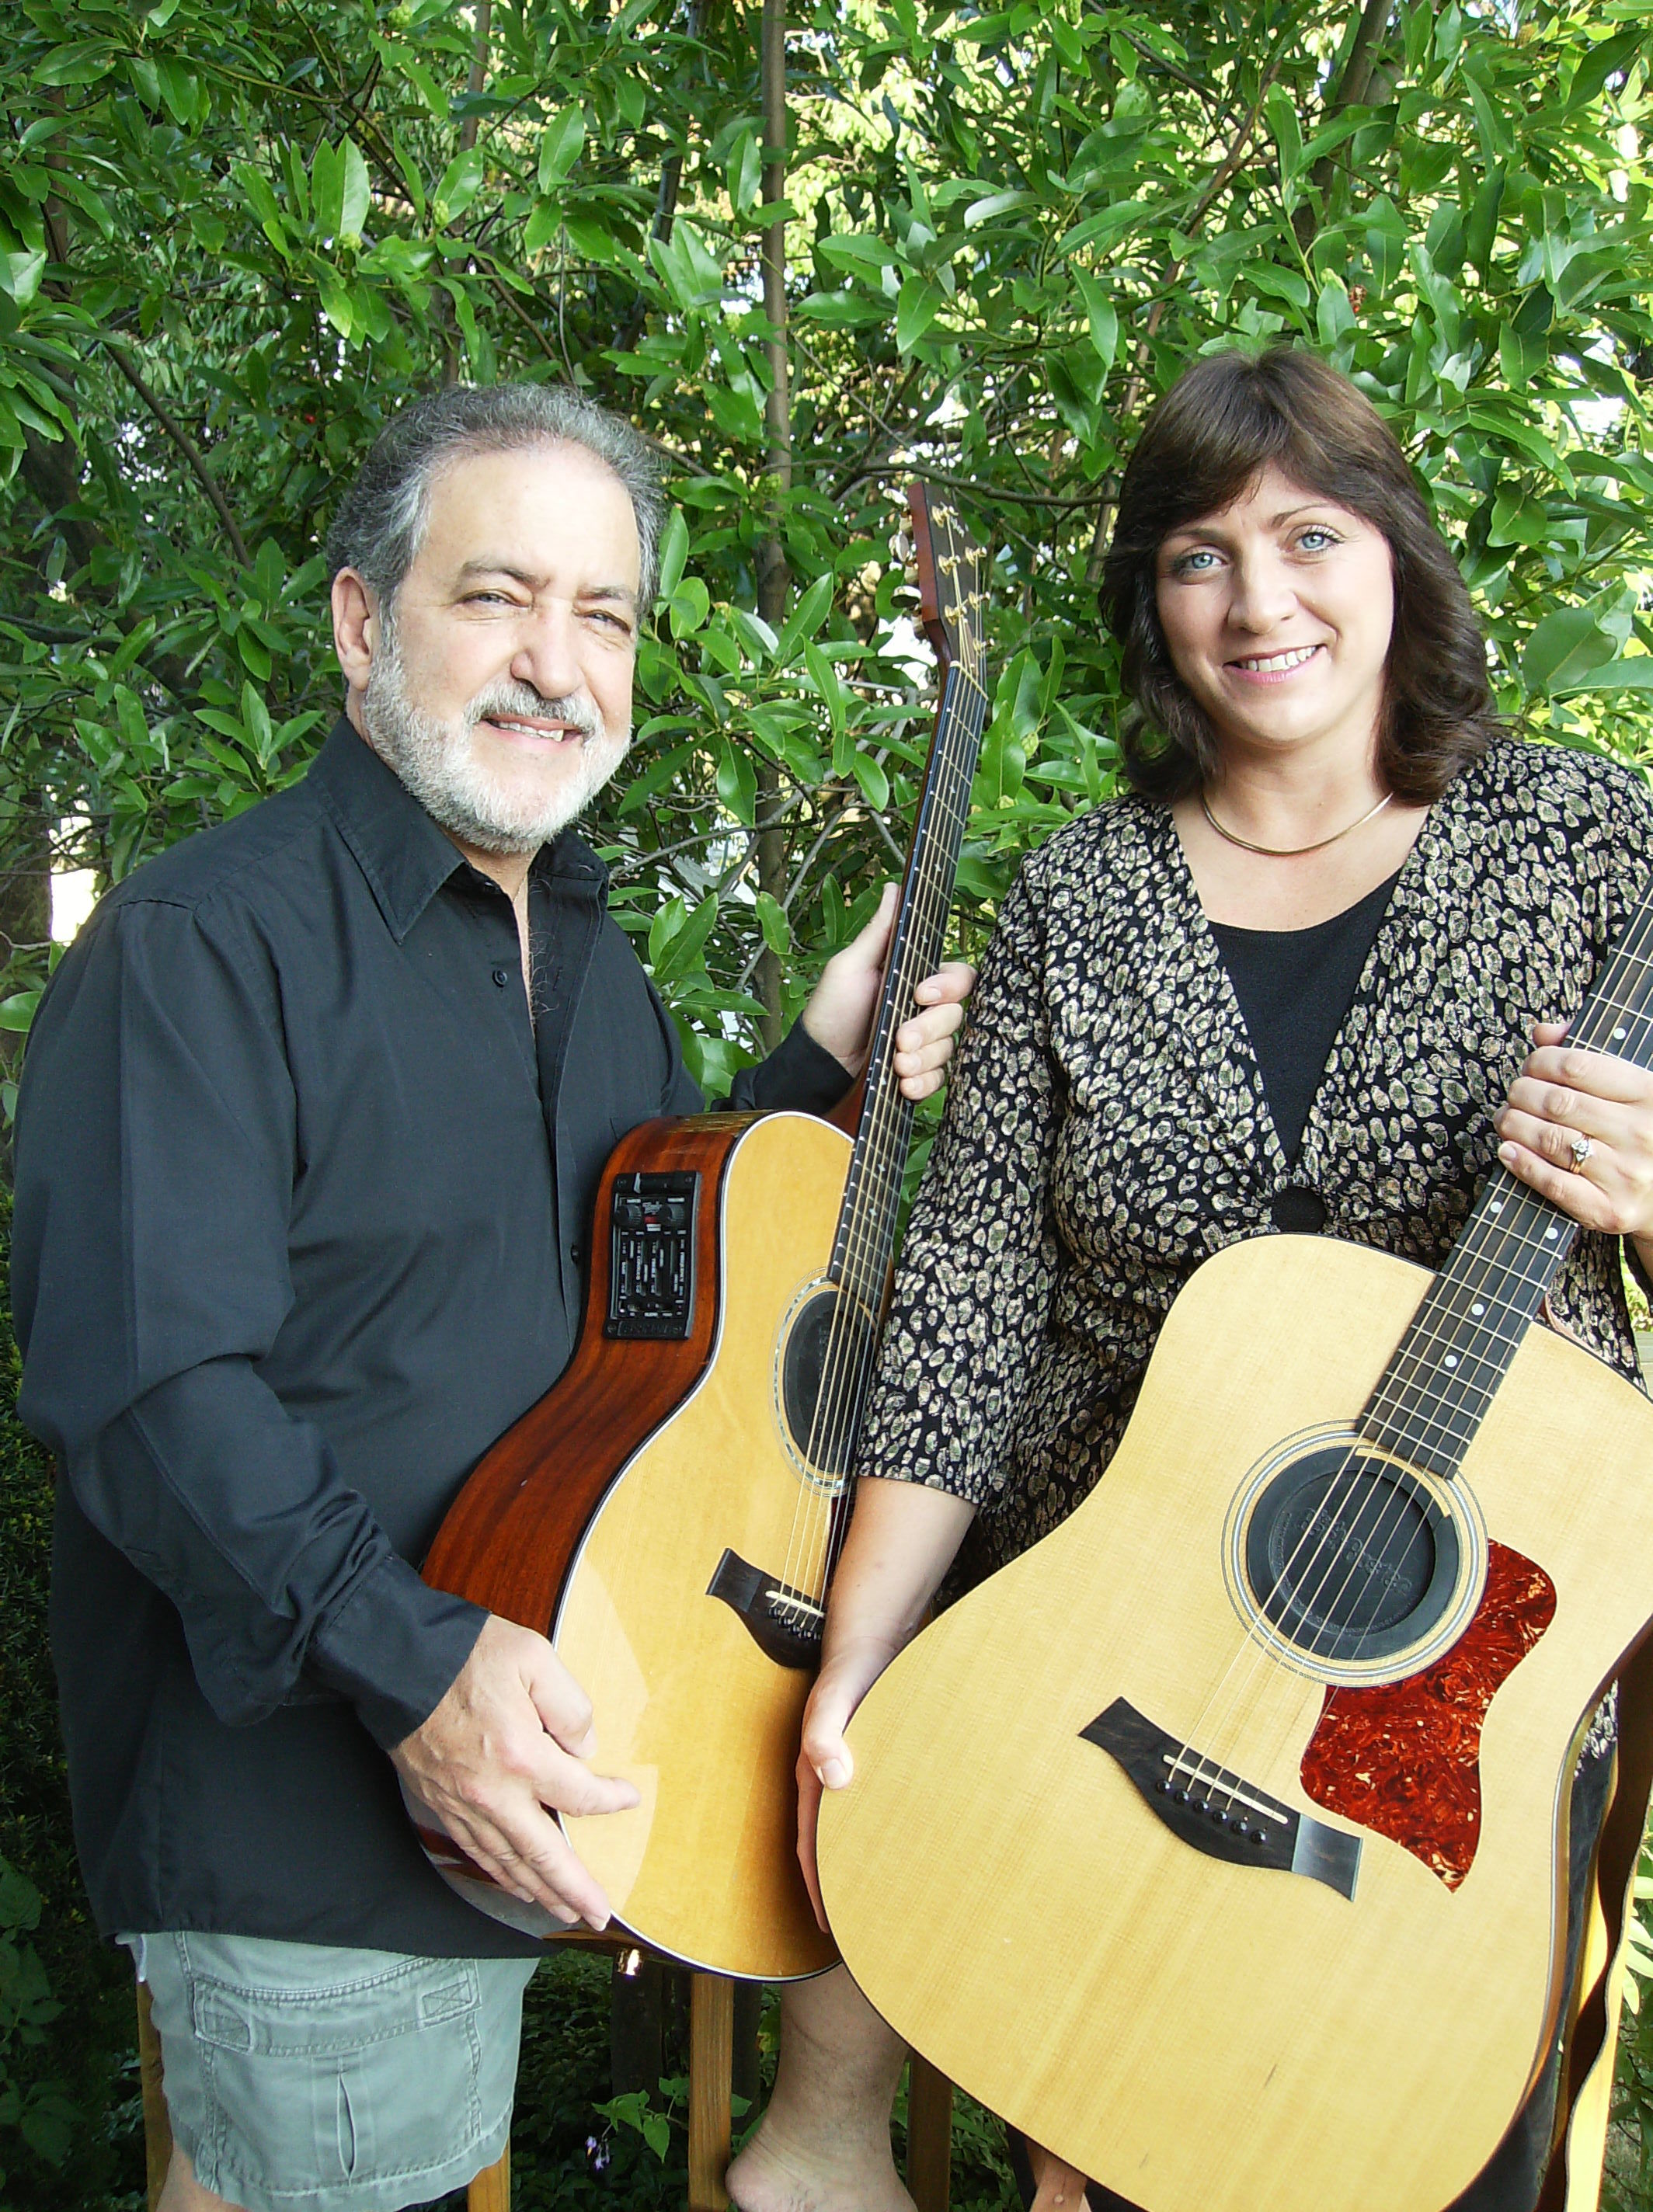 A man and woman posing with acoustic guitars